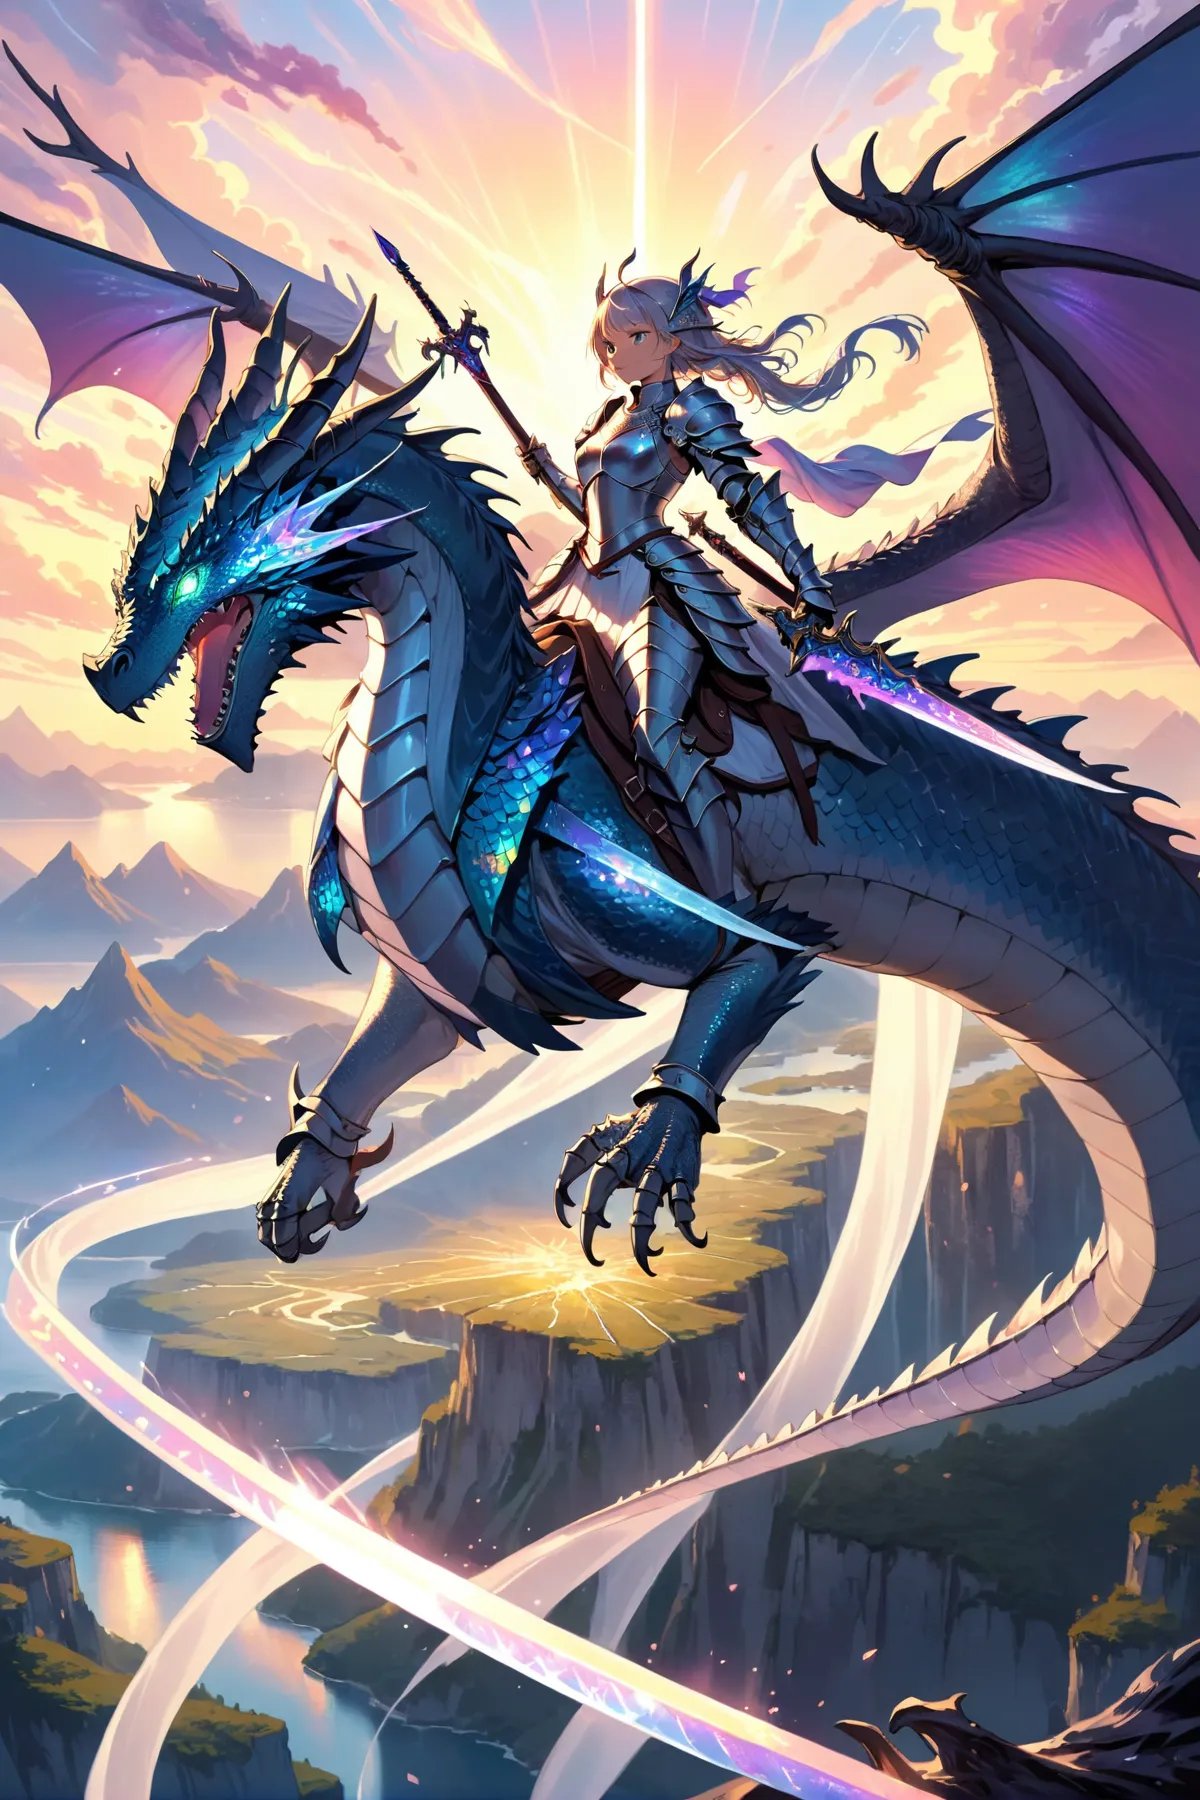 Illustration of a female knight in armor riding a majestic dragon, holding a glowing sword while soaring over a breathtaking fantasy landscape. The dragon's scales shimmer with iridescence as it spreads its wings wide, exuding power and elegance.